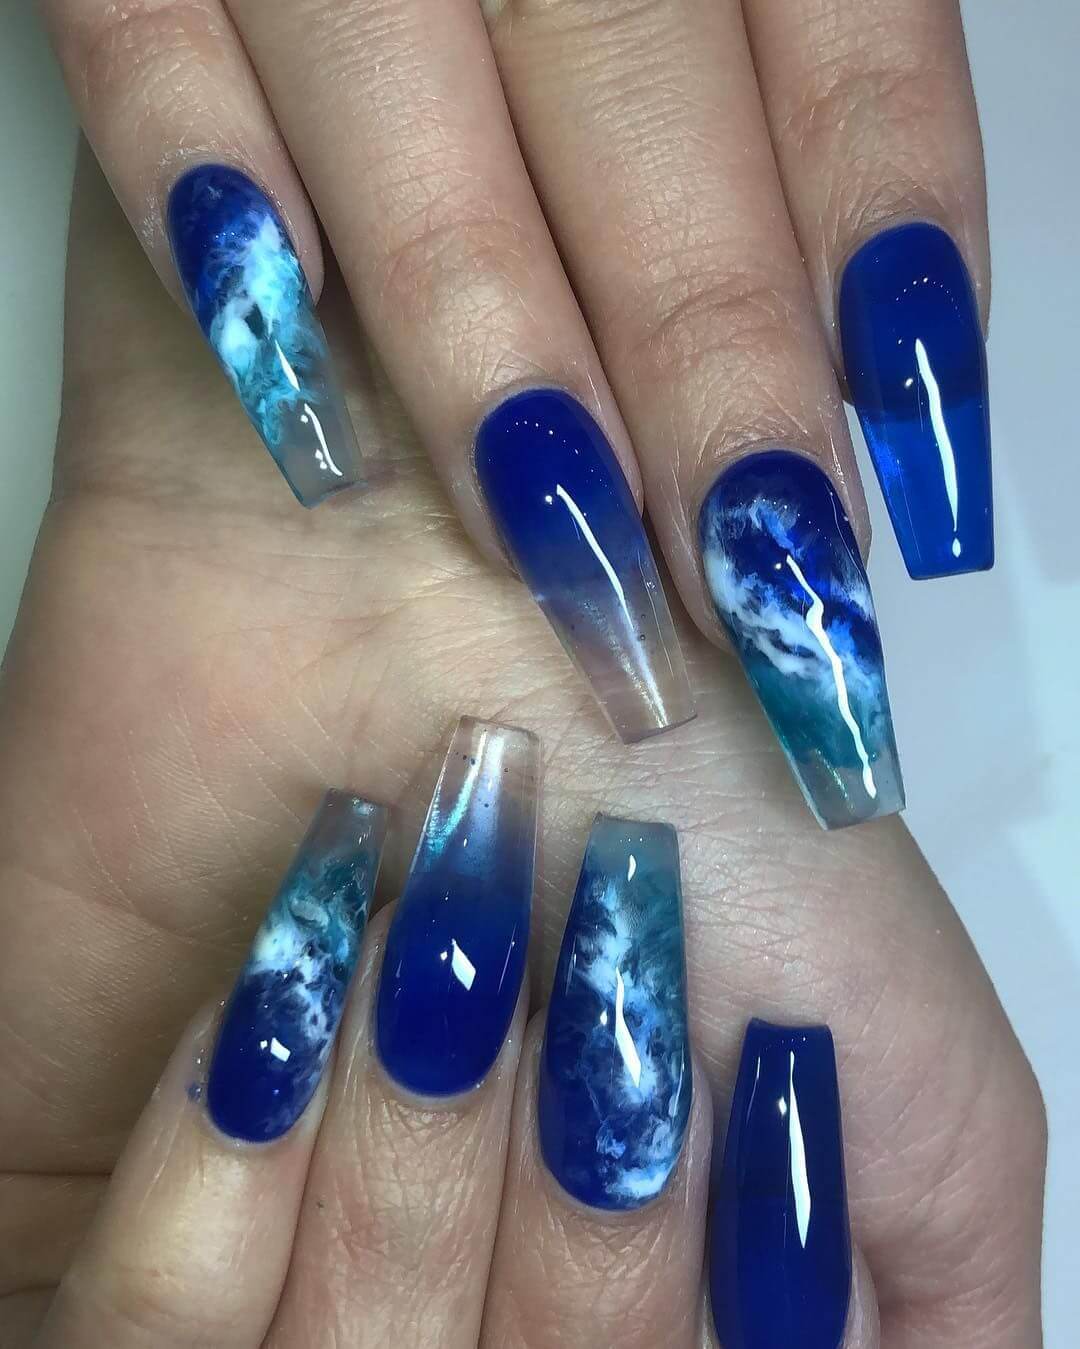 This ocean design for acrylic nails